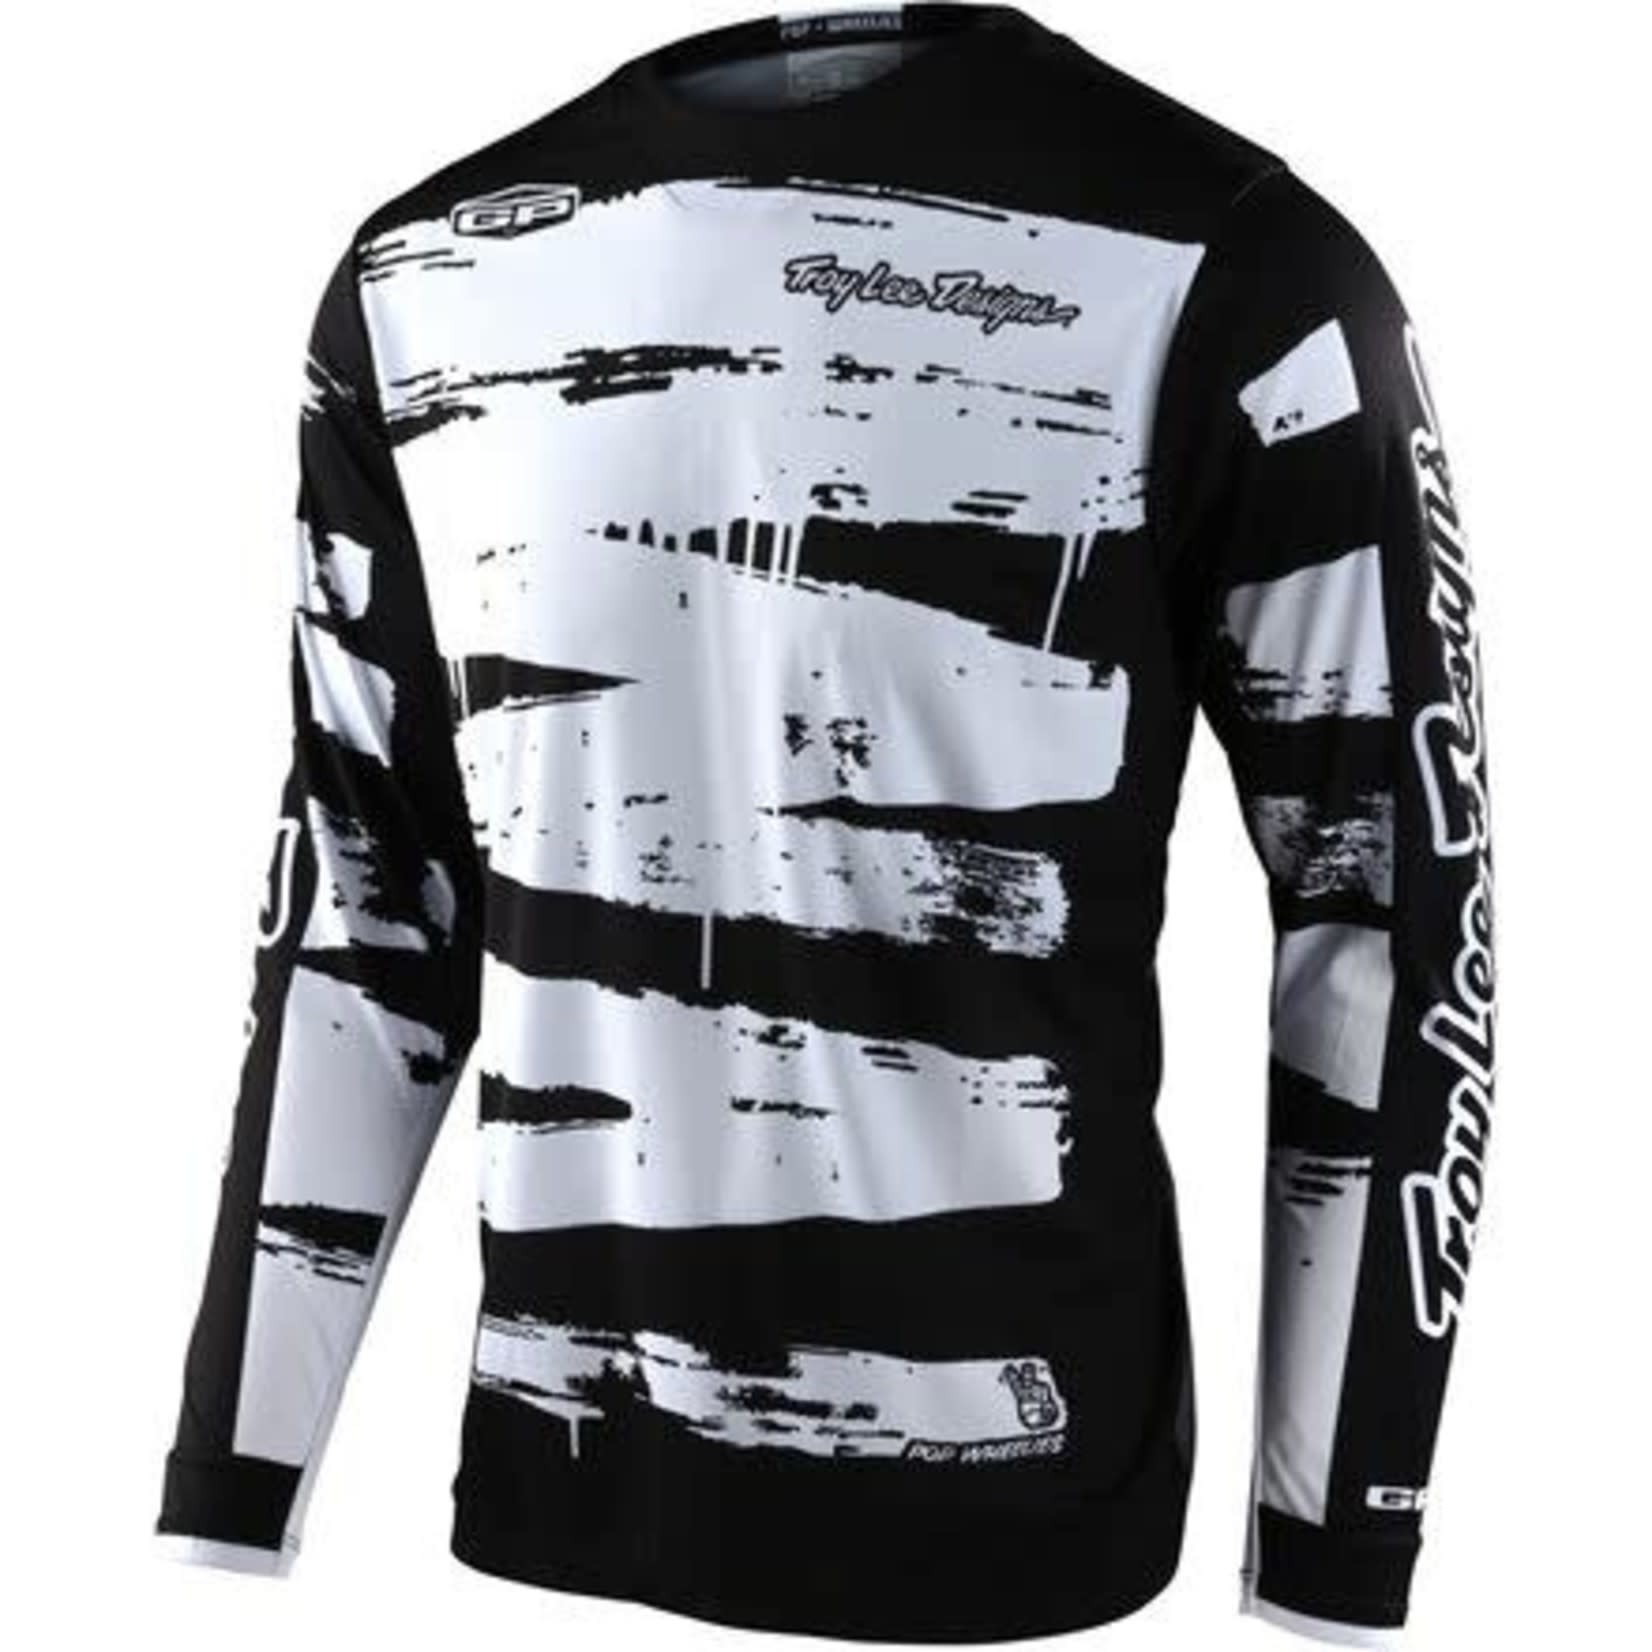 TROY LEE DESIGNS YOUTH GP JERSEY BRUSHED